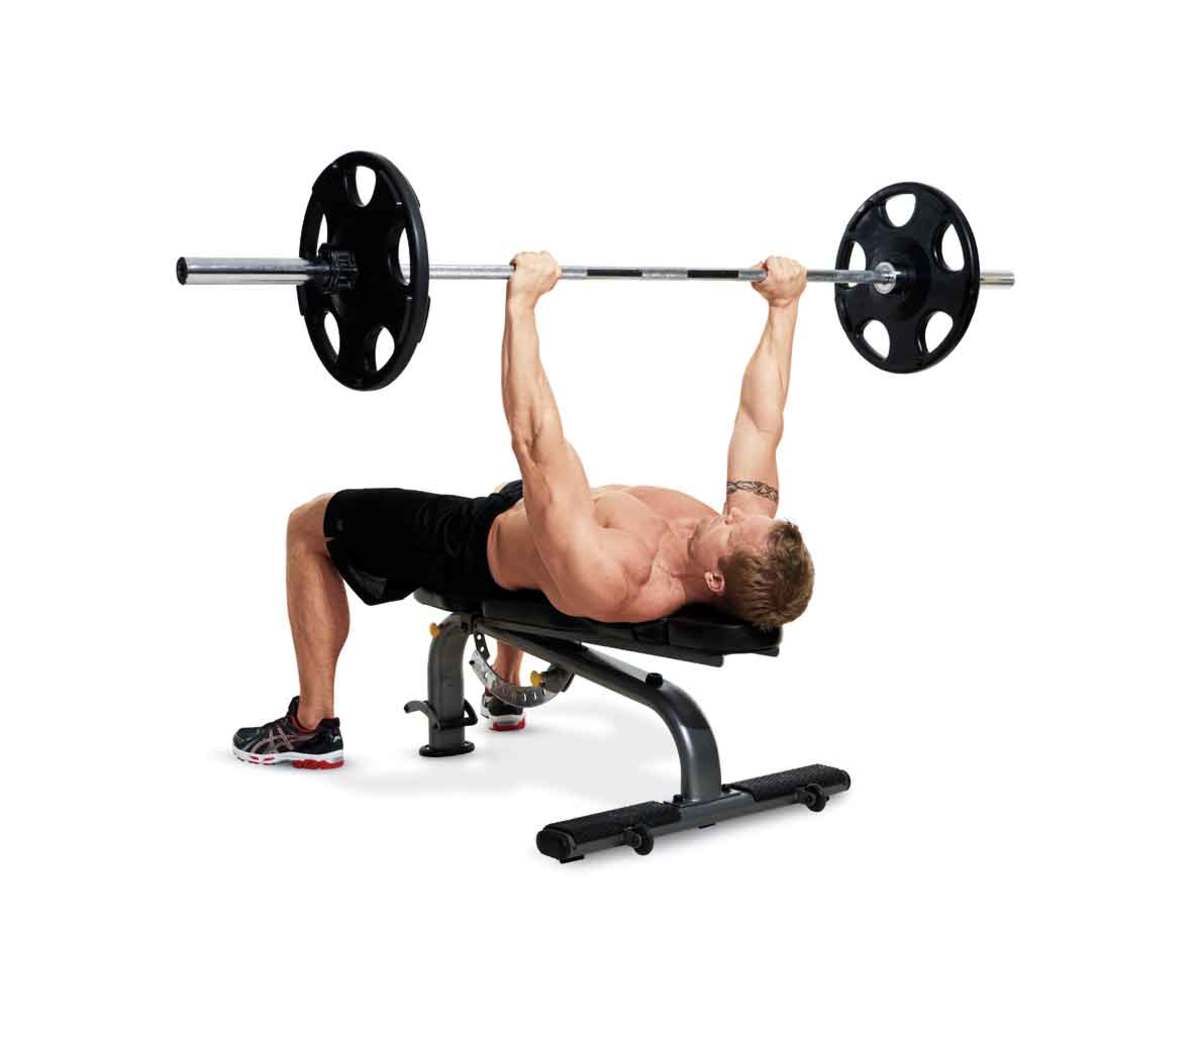 Man Lighting Weights on a Bench